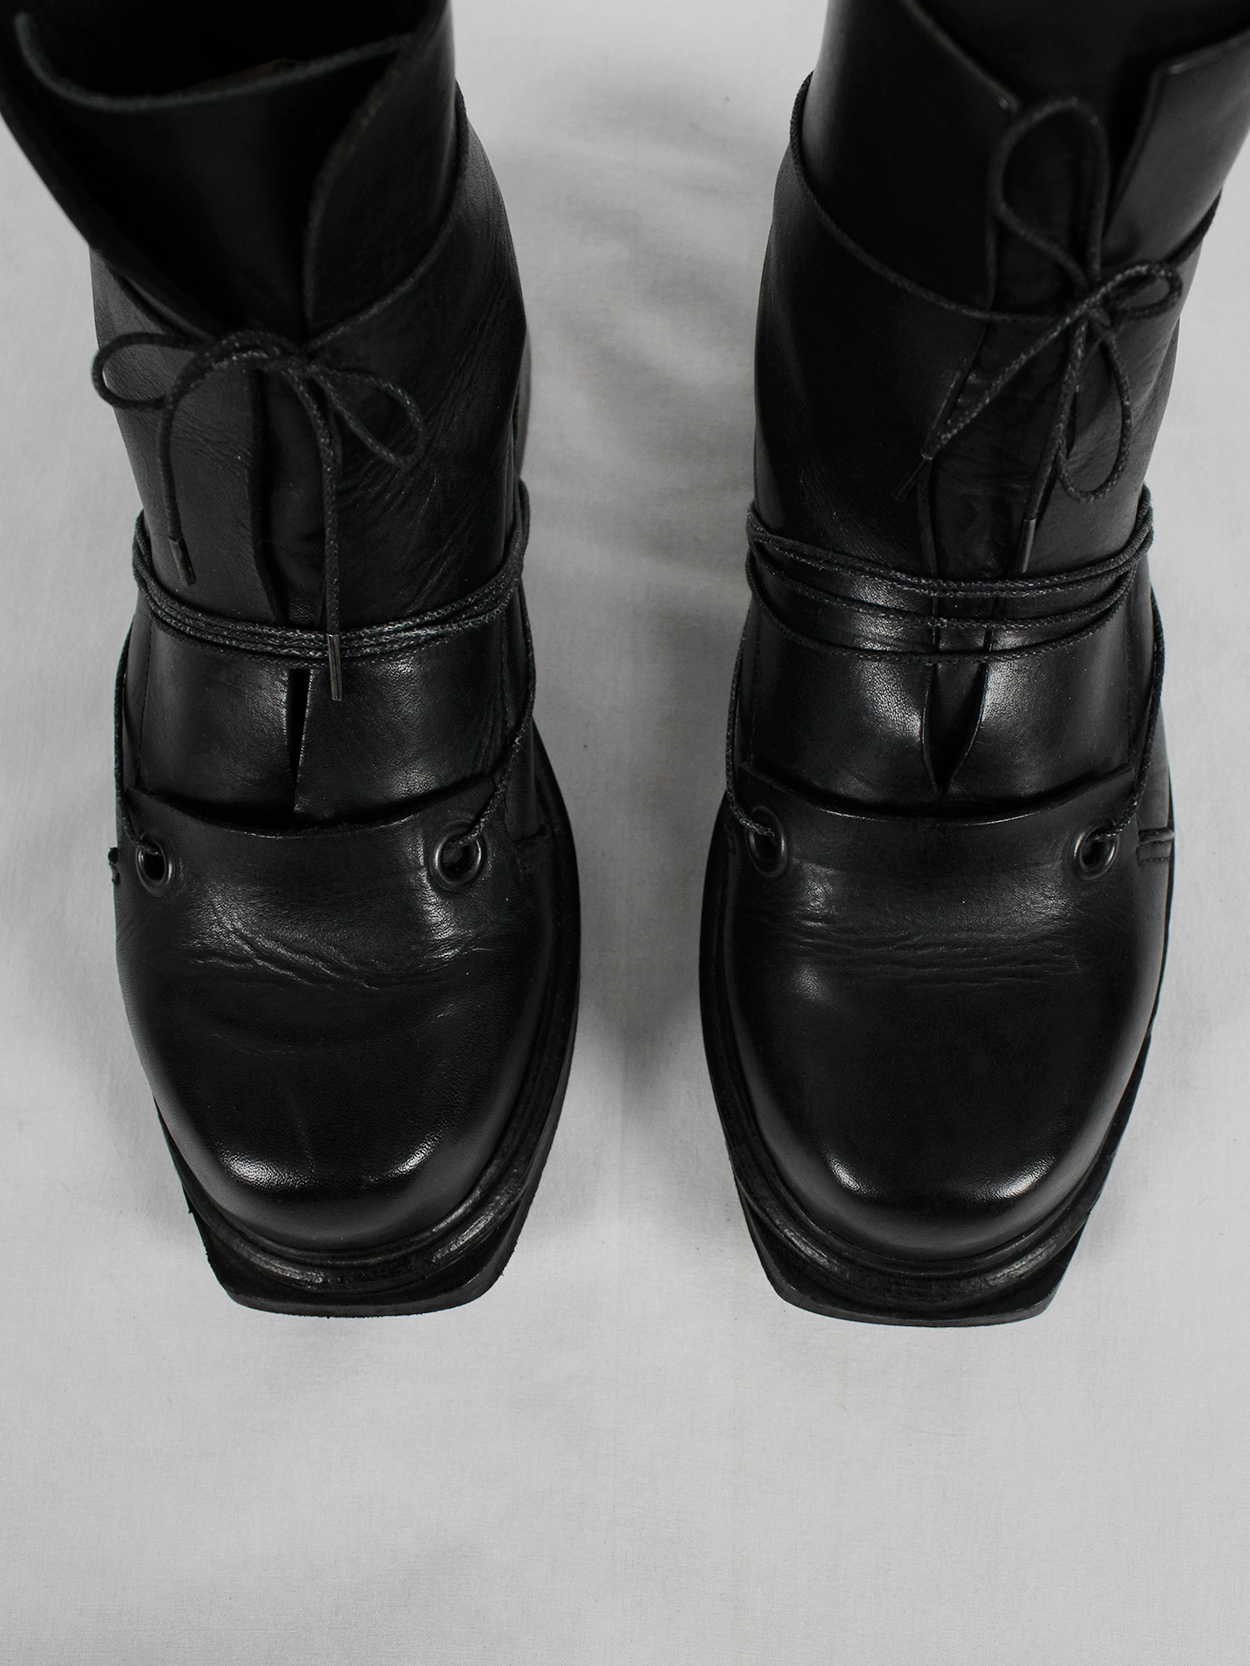 Dirk Bikkembergs black mountaineering boots with laces through the soles 1990s (14)